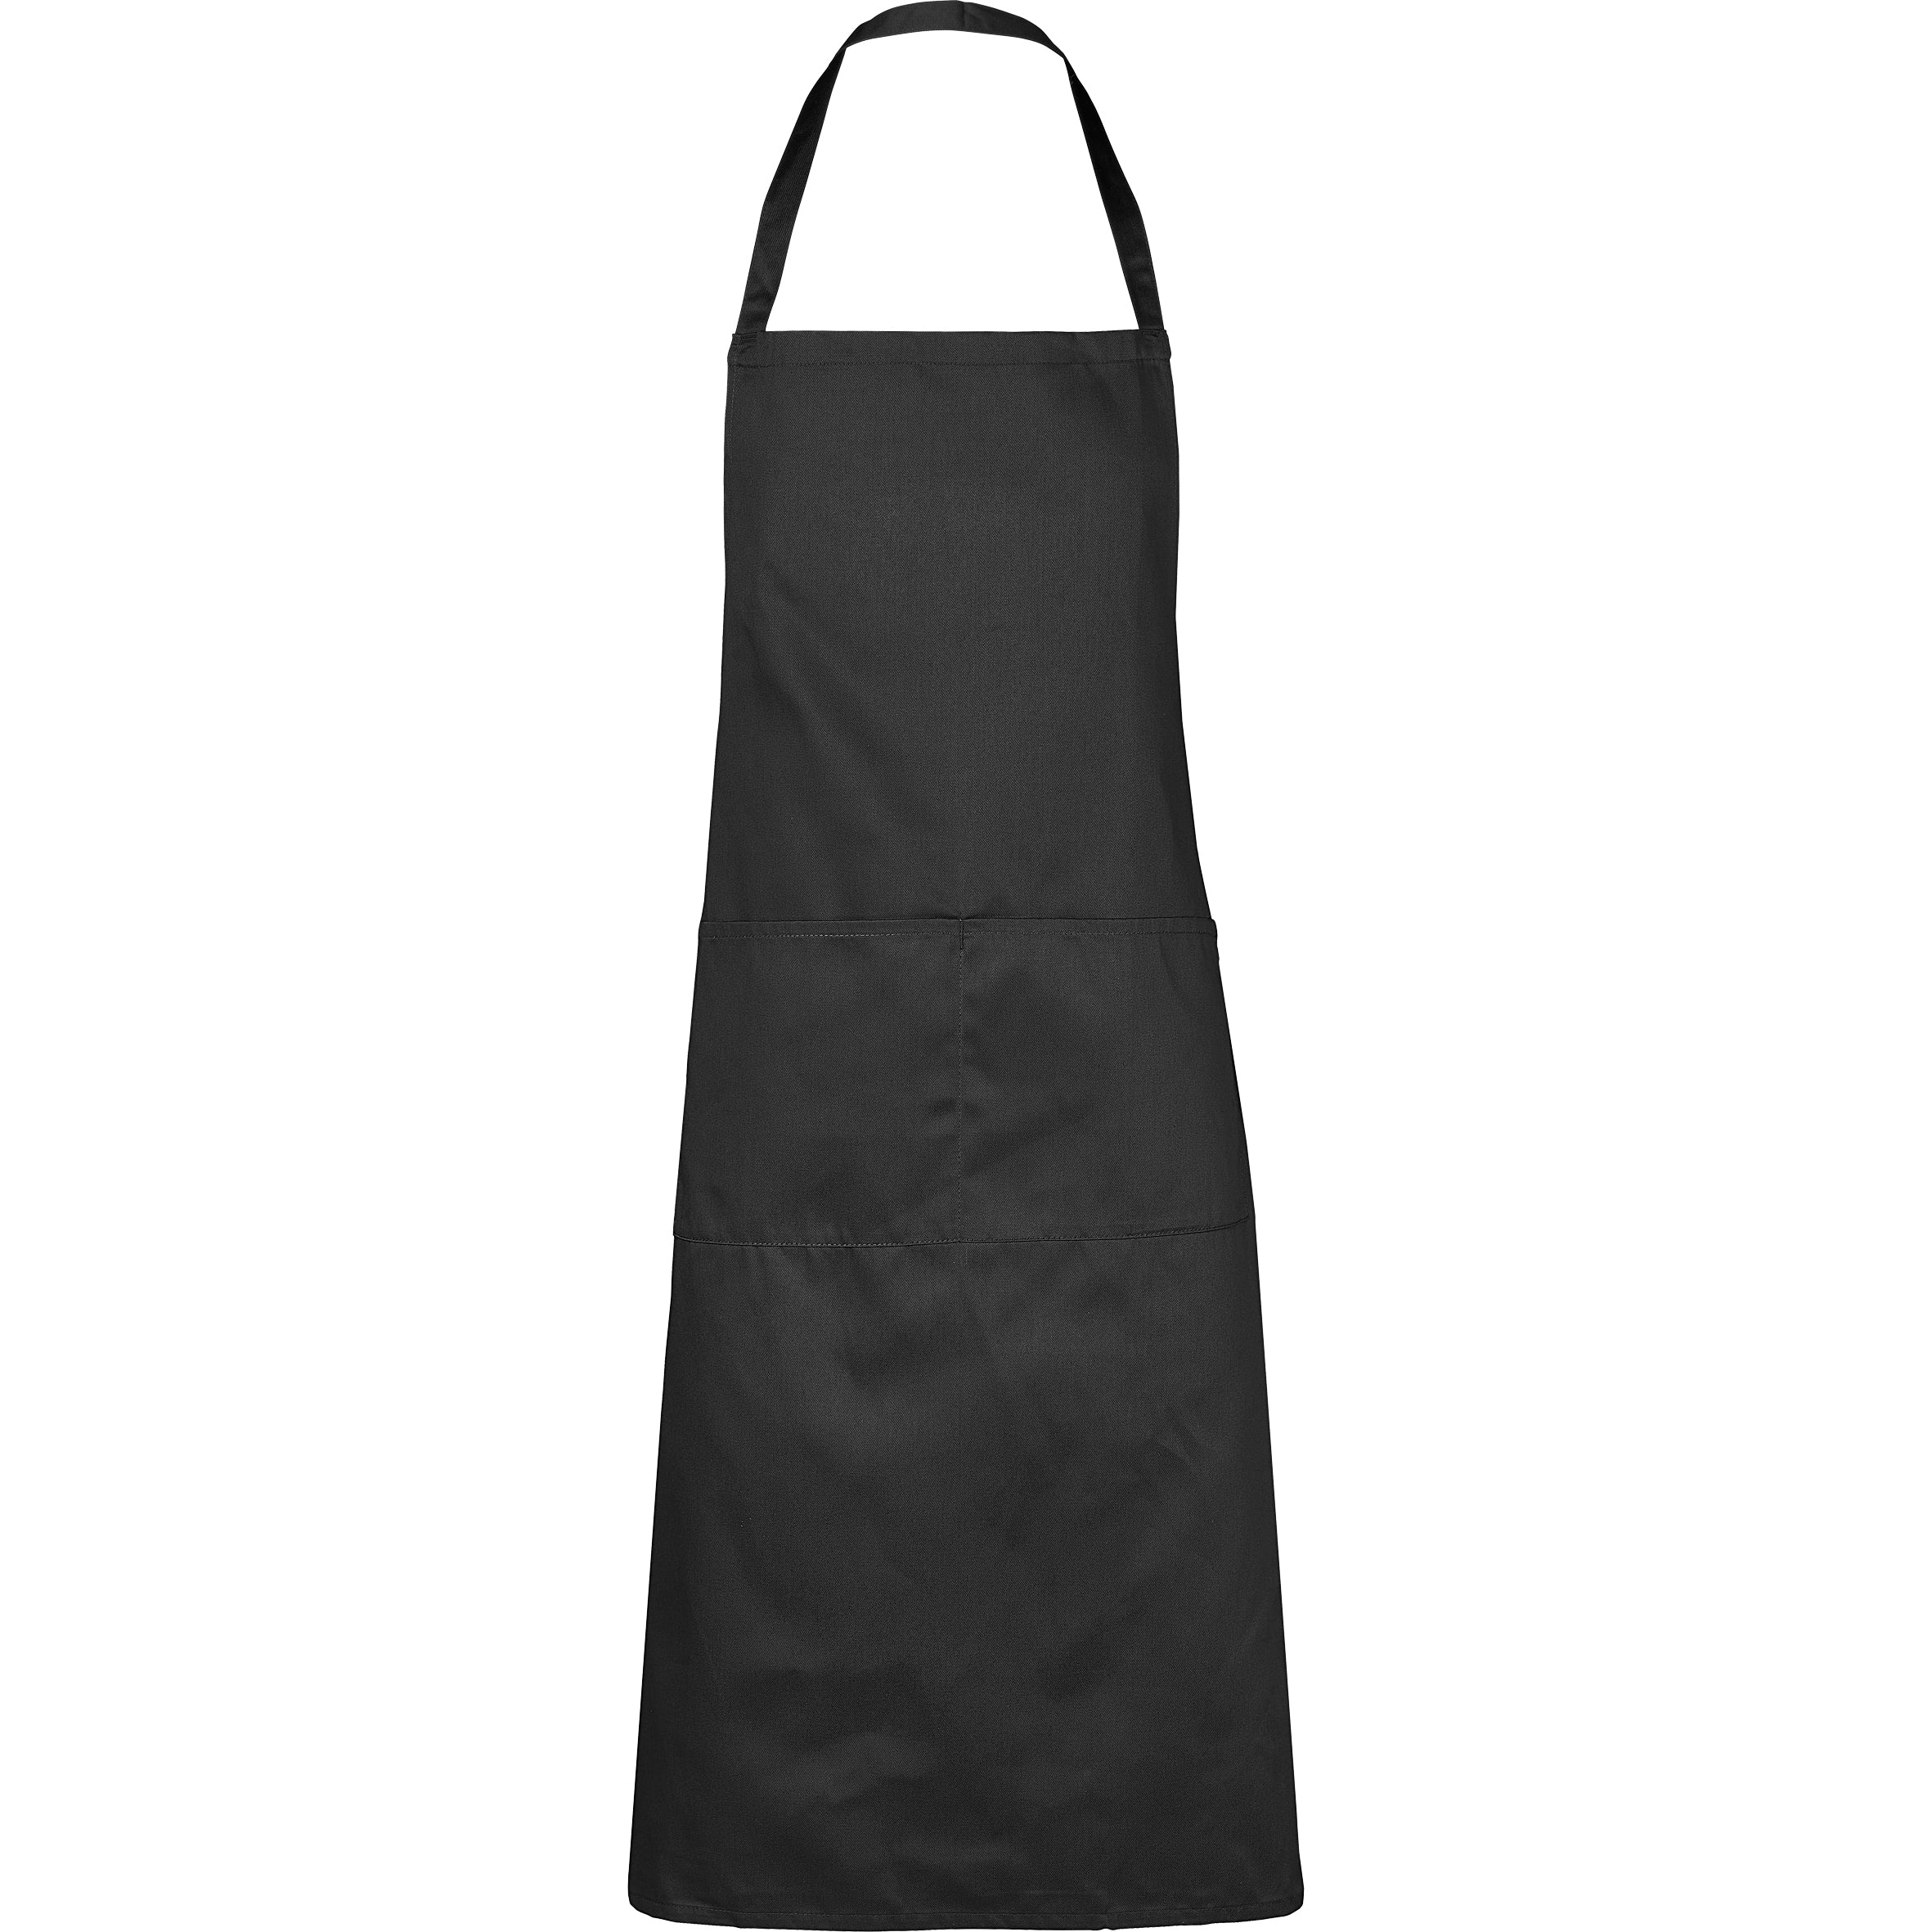 Unisex Cooking / Service Industry Apron